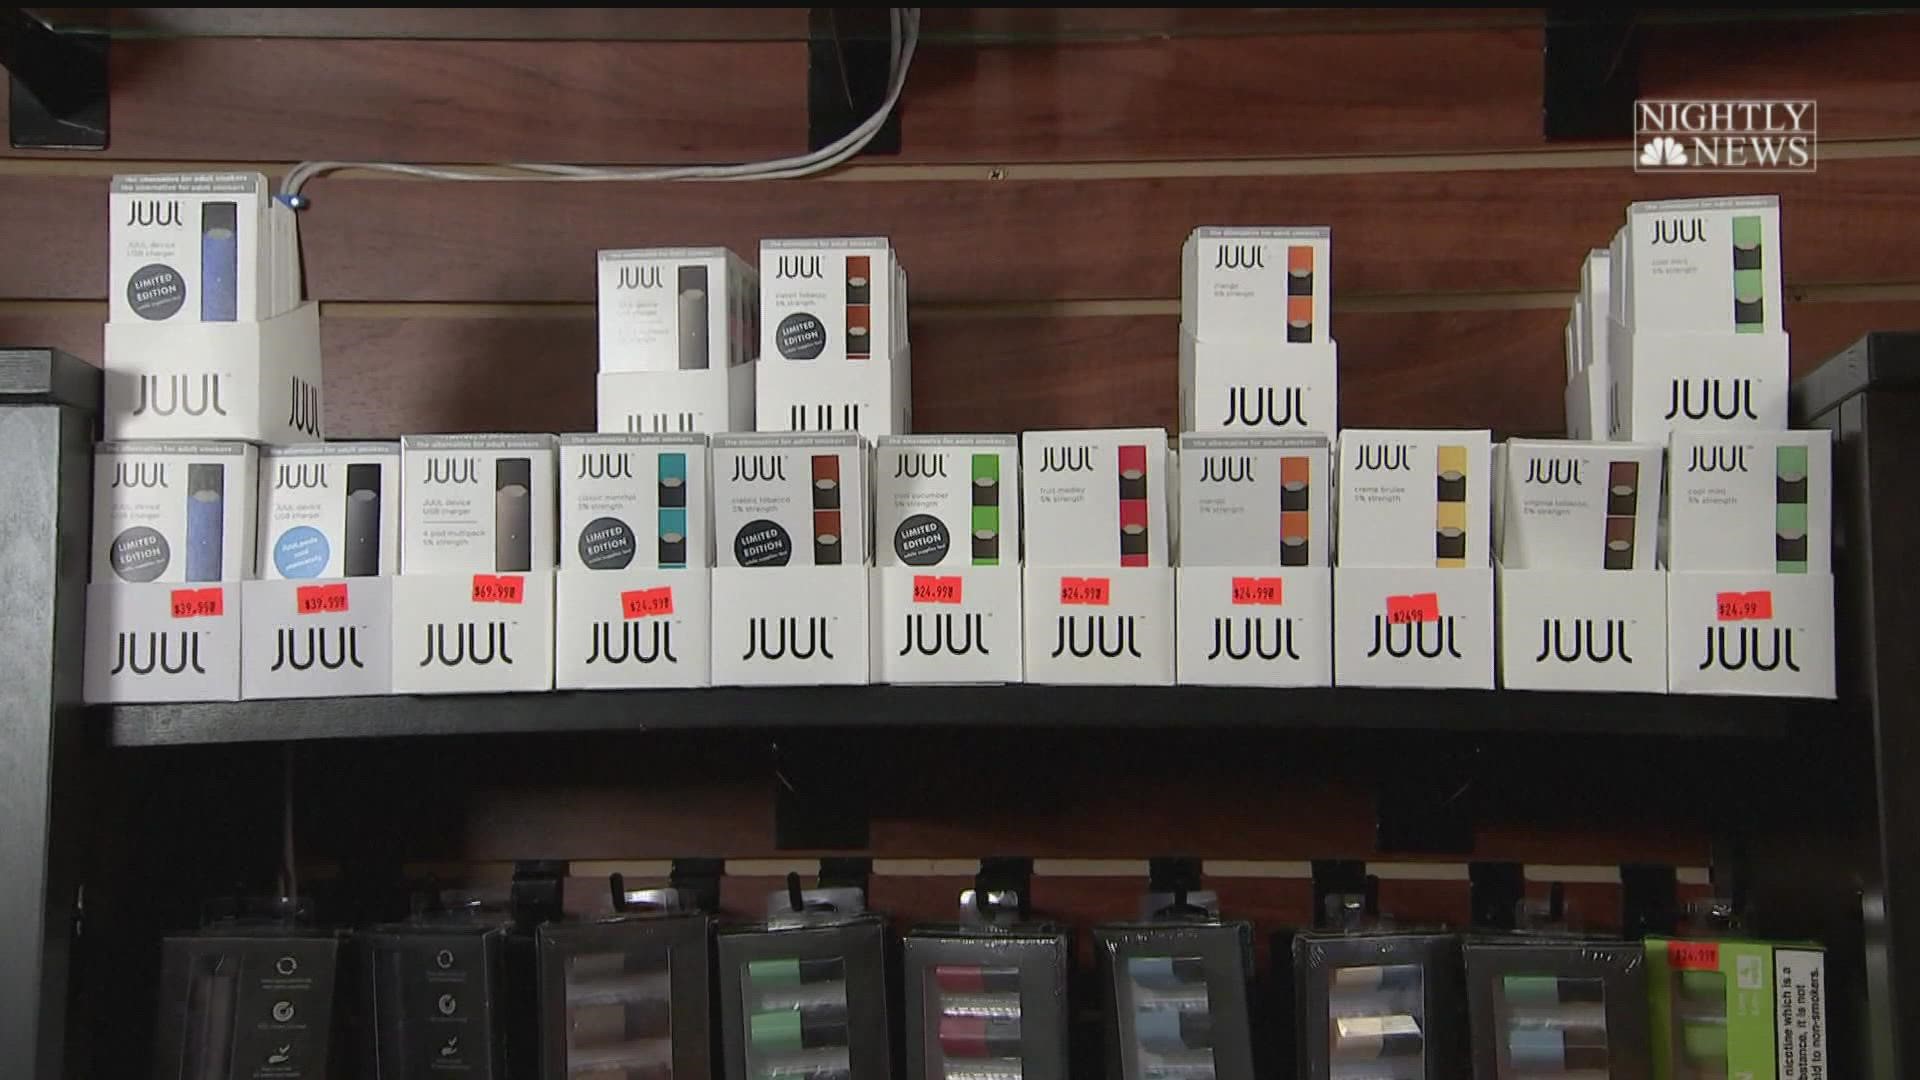 The administration said that Juul didn't market their products to protect public health.